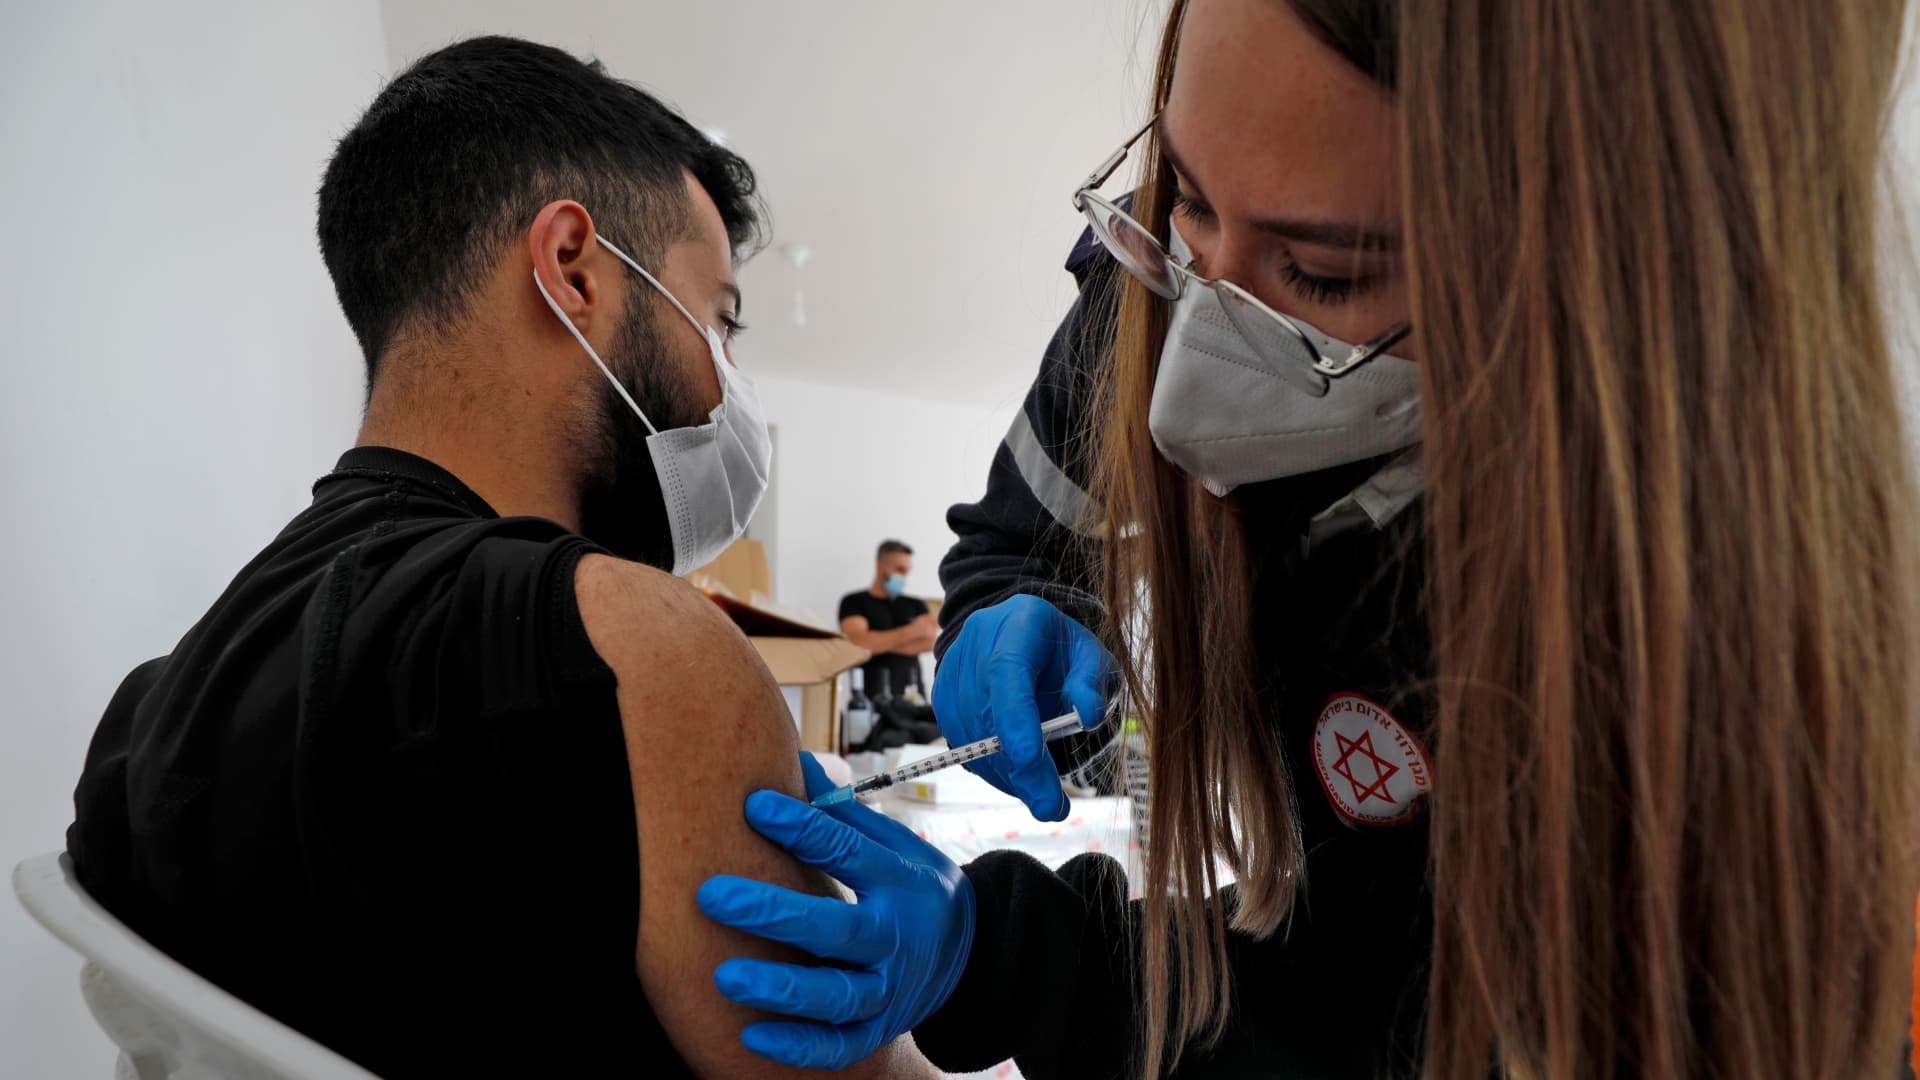 A health worker administers a dose of the Pfizer-BioNtech COVID-19 coronavirus vaccine at a mobile clinic near Moshav Dalton in northern Israel on February 22, 2021.